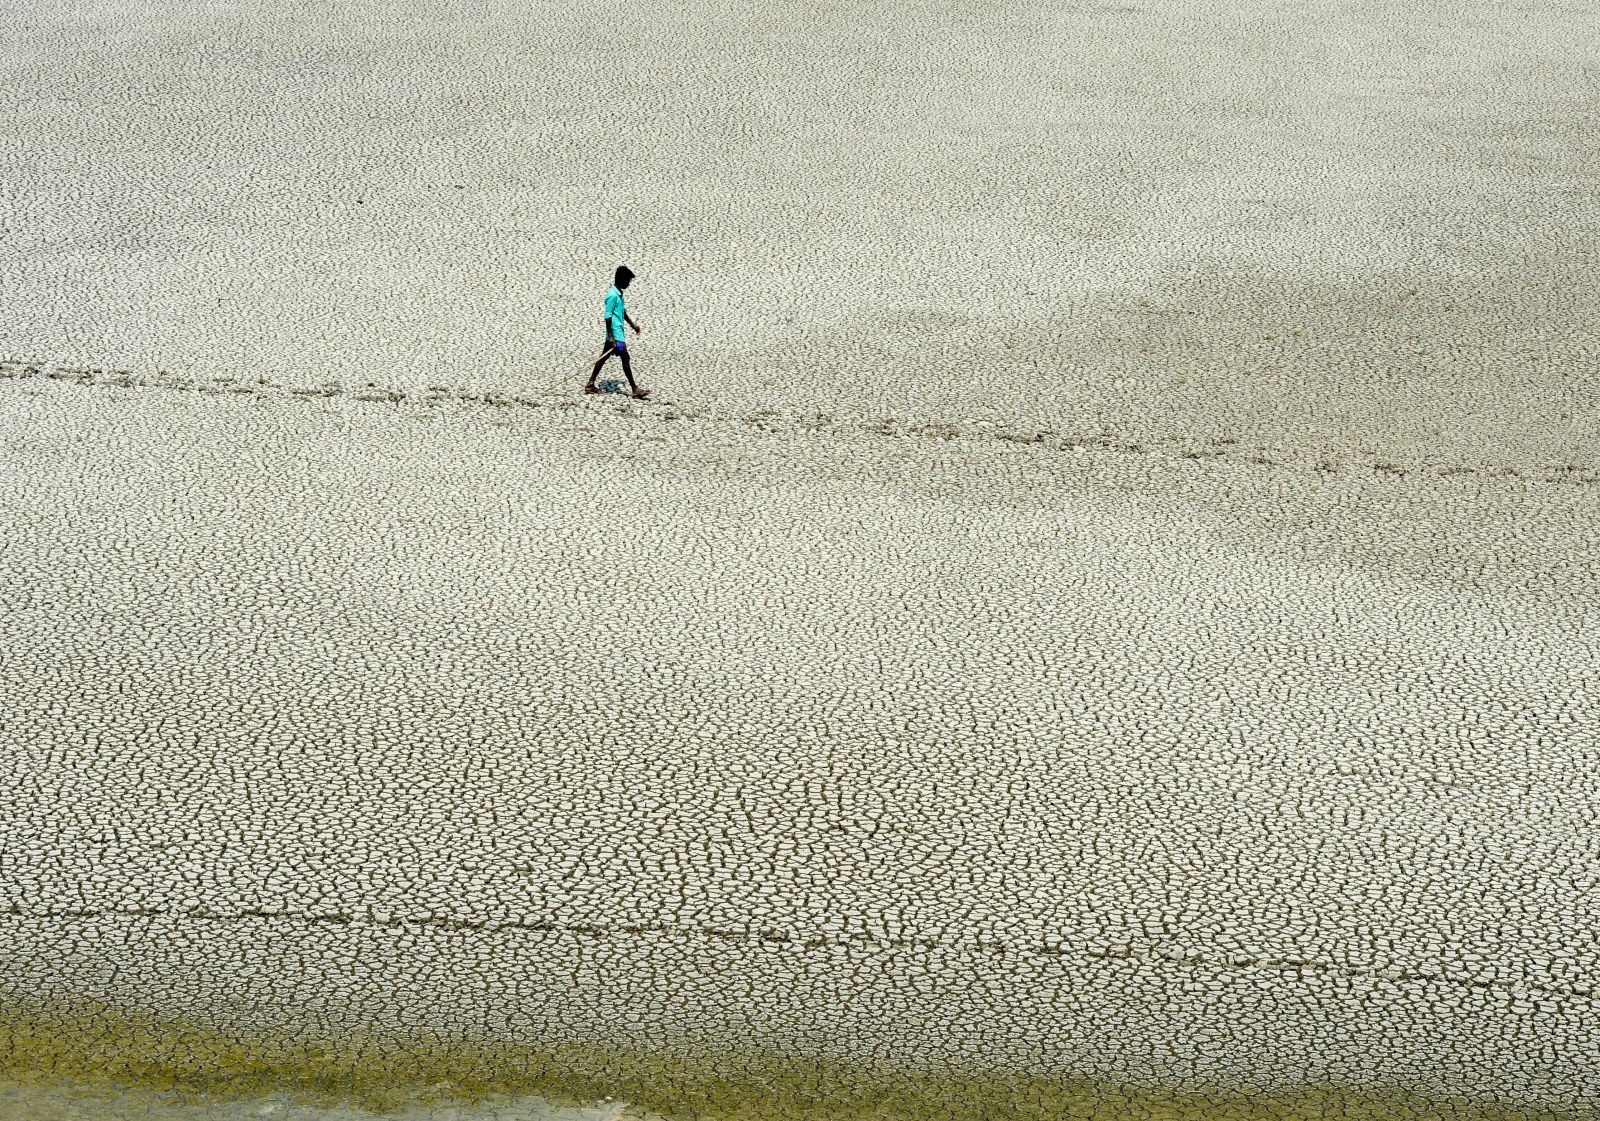 A young man looks for mud crabs and snakehead fish as he walks on the parched bed of Chembarambakkam Lake, on the outskirts of Chennai, on 21 May 2019. Photo: Arun Sankar / AFP / Getty Images